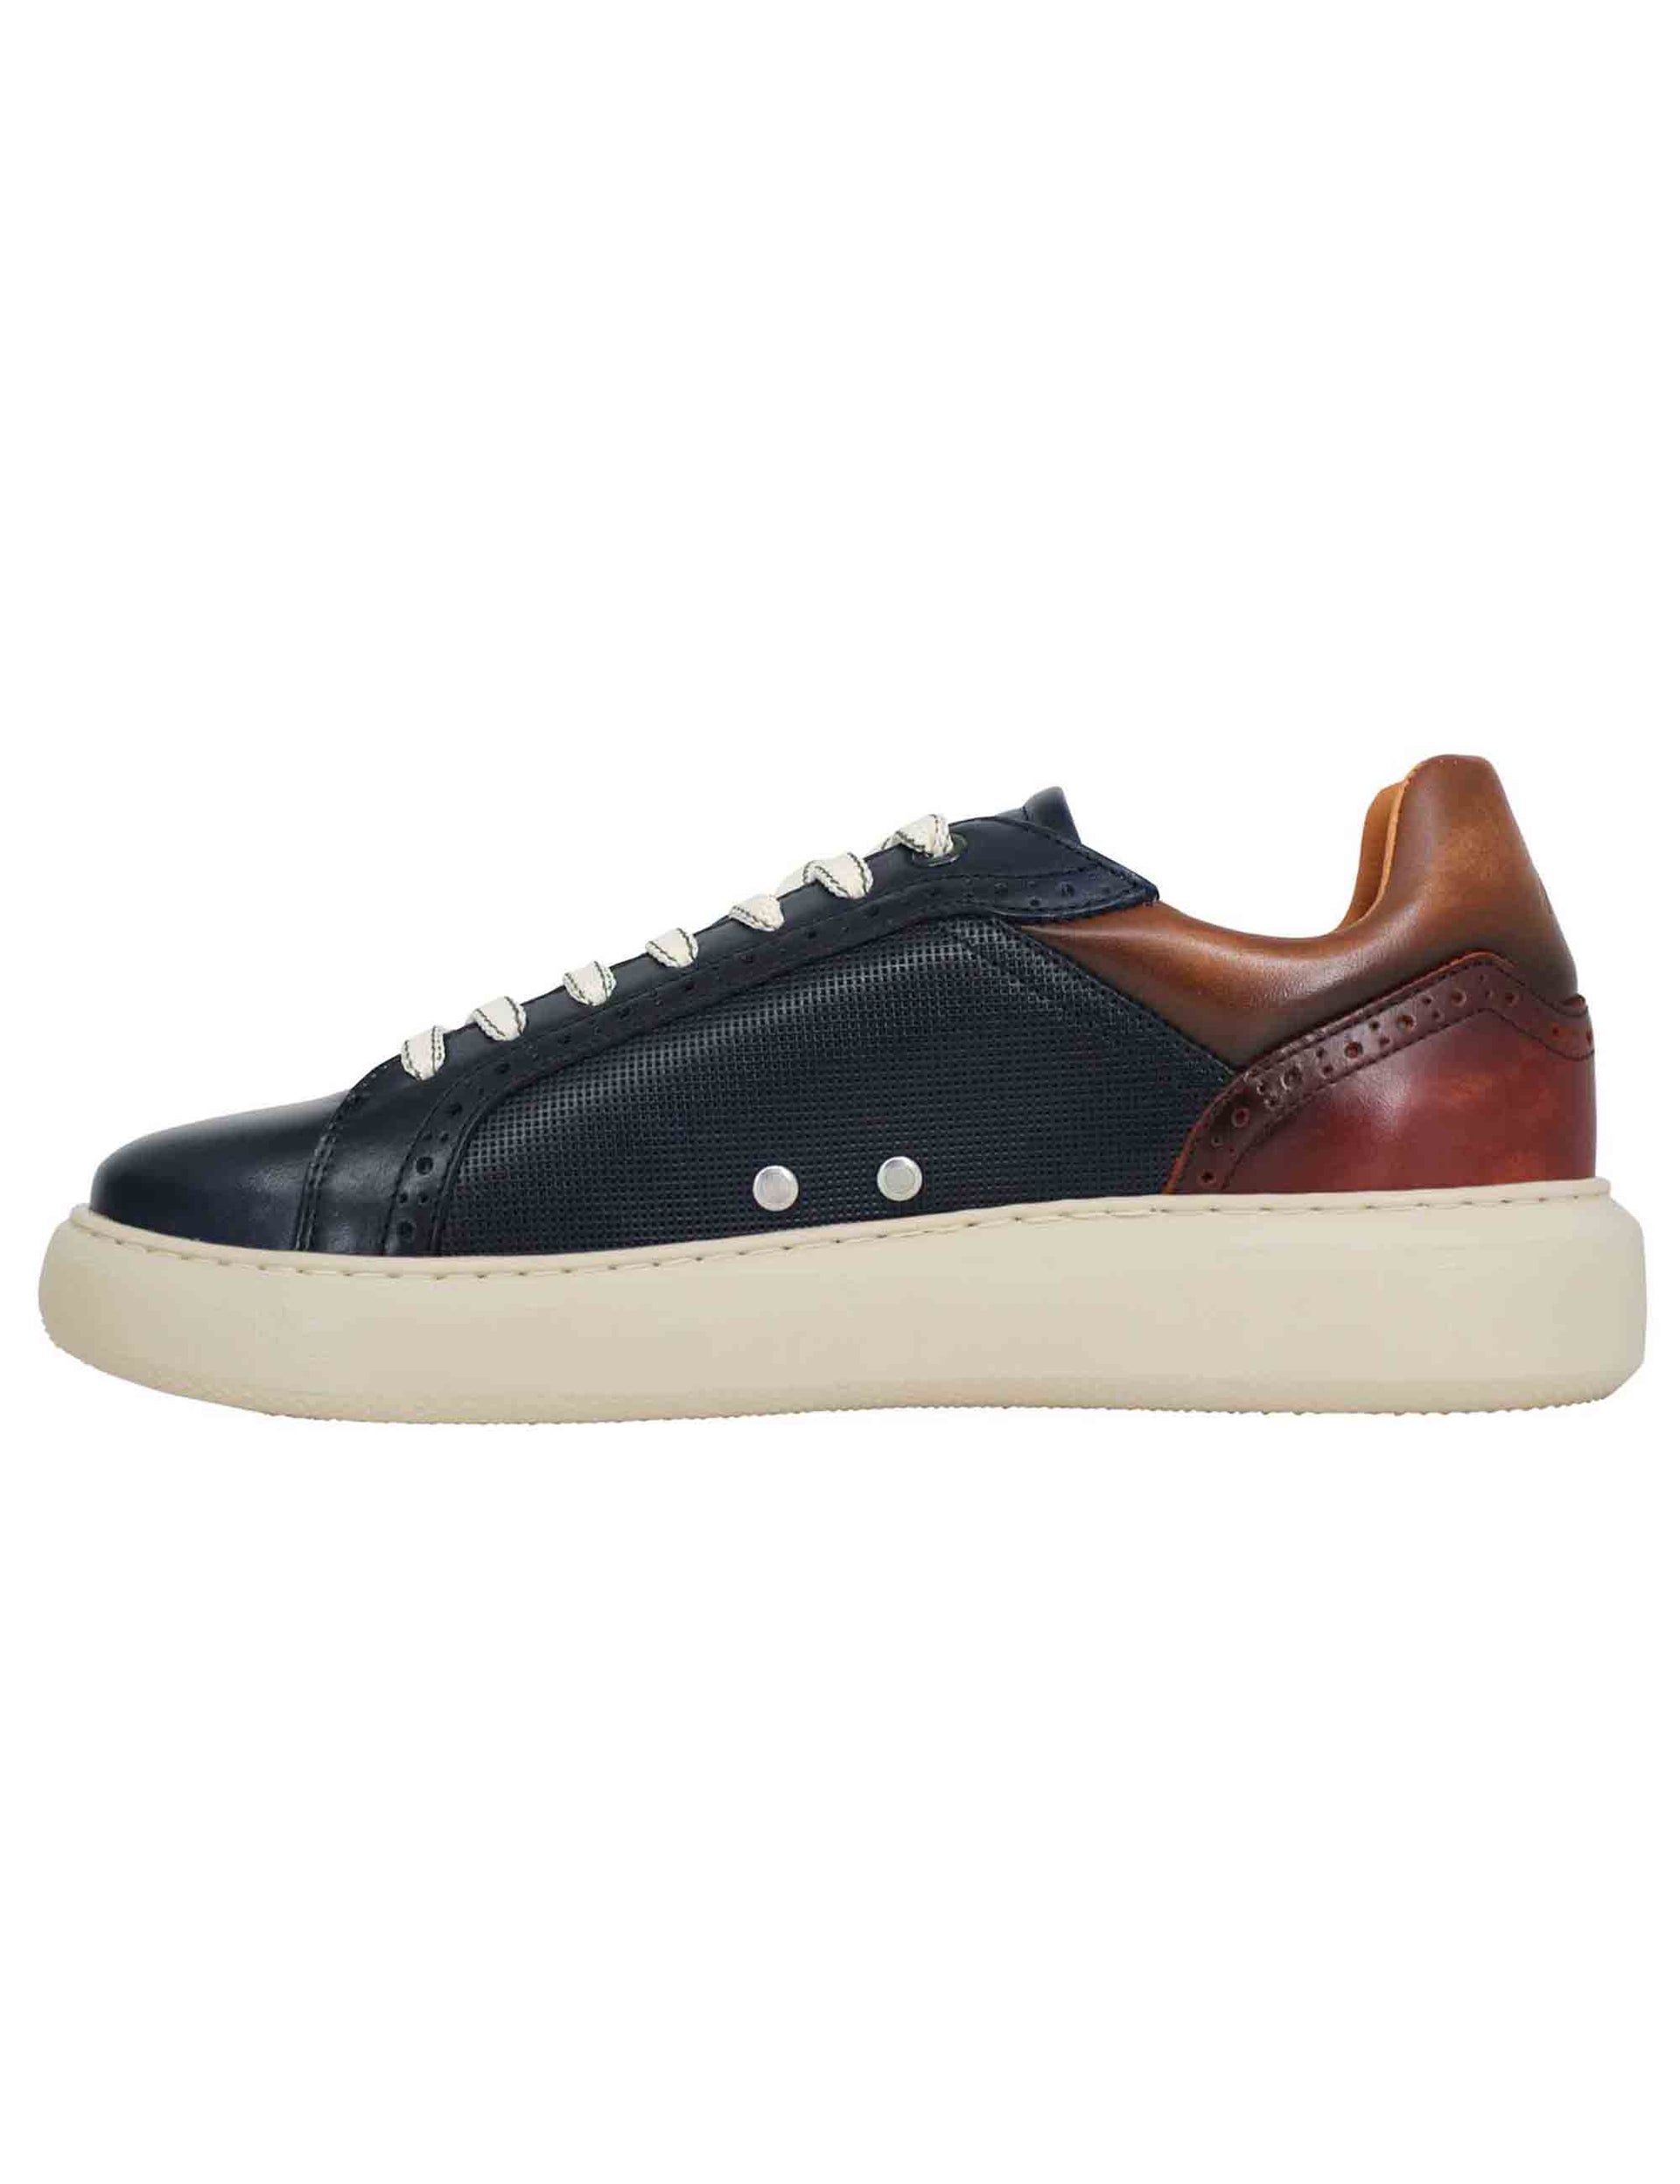 Eclipse men's sneakers in blue leather